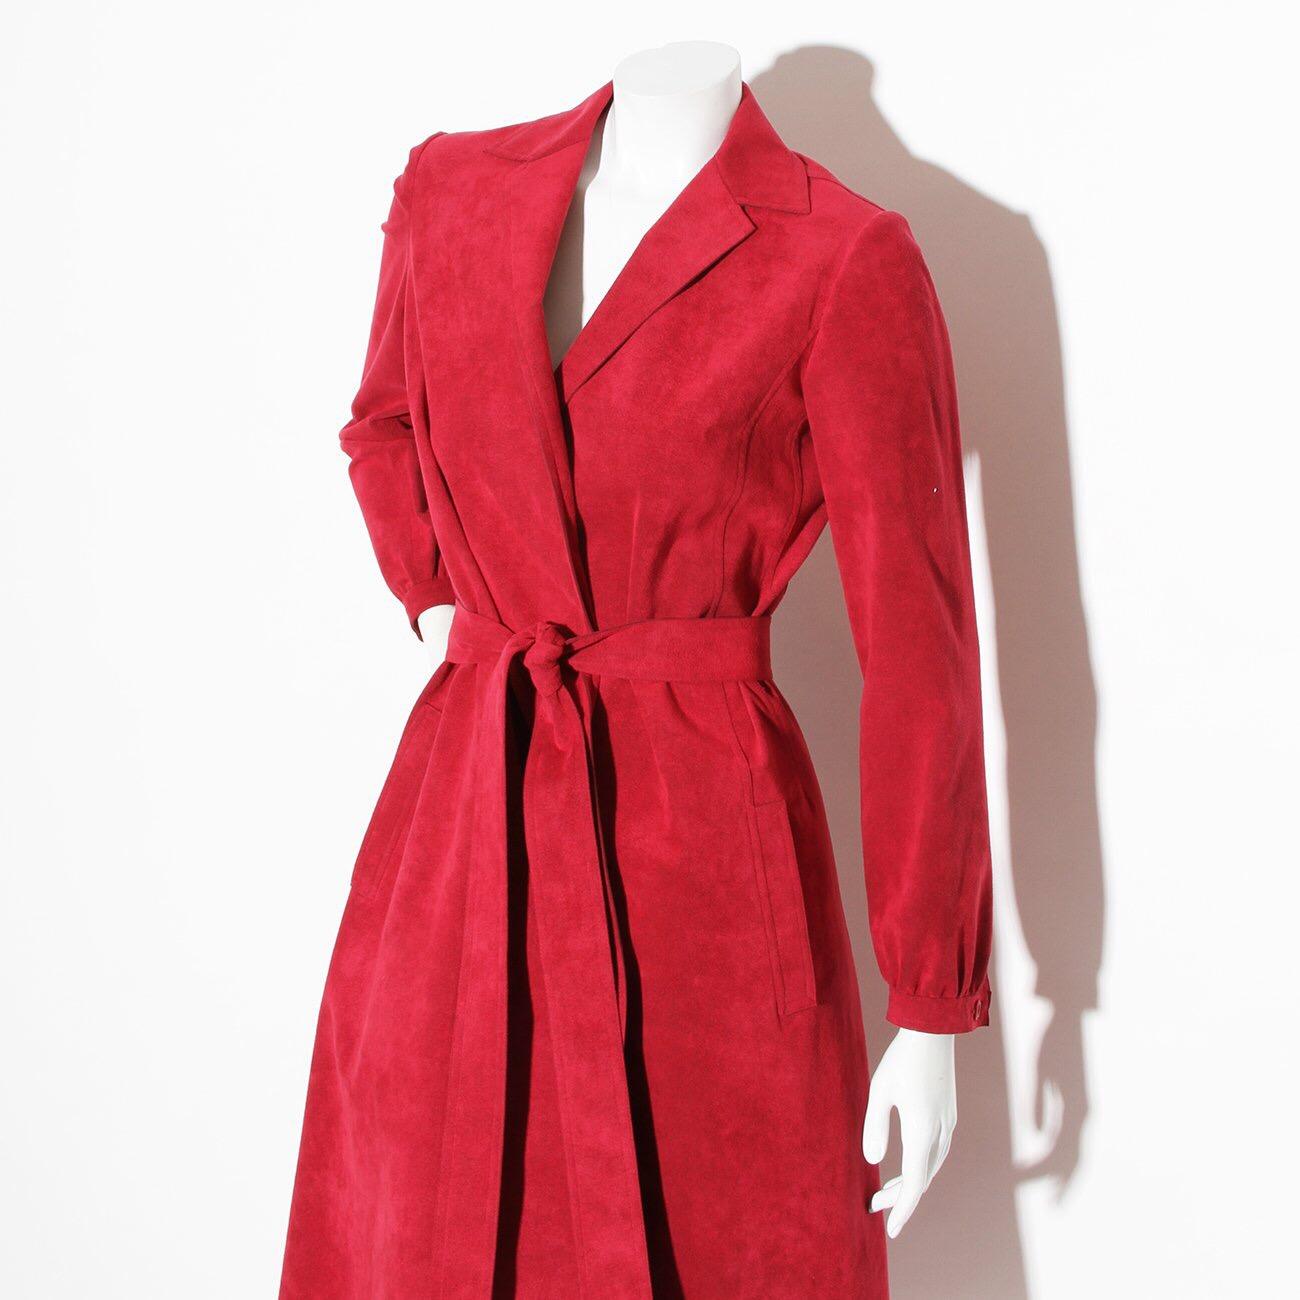 An iconic example from Roy Frowick Halston’s earlier work composed in the renowned patented “Ultrasuede” fabric which was revolutionary for its time for providing a luxury look for a more economical price in addition to low maintenance. Glastonbury